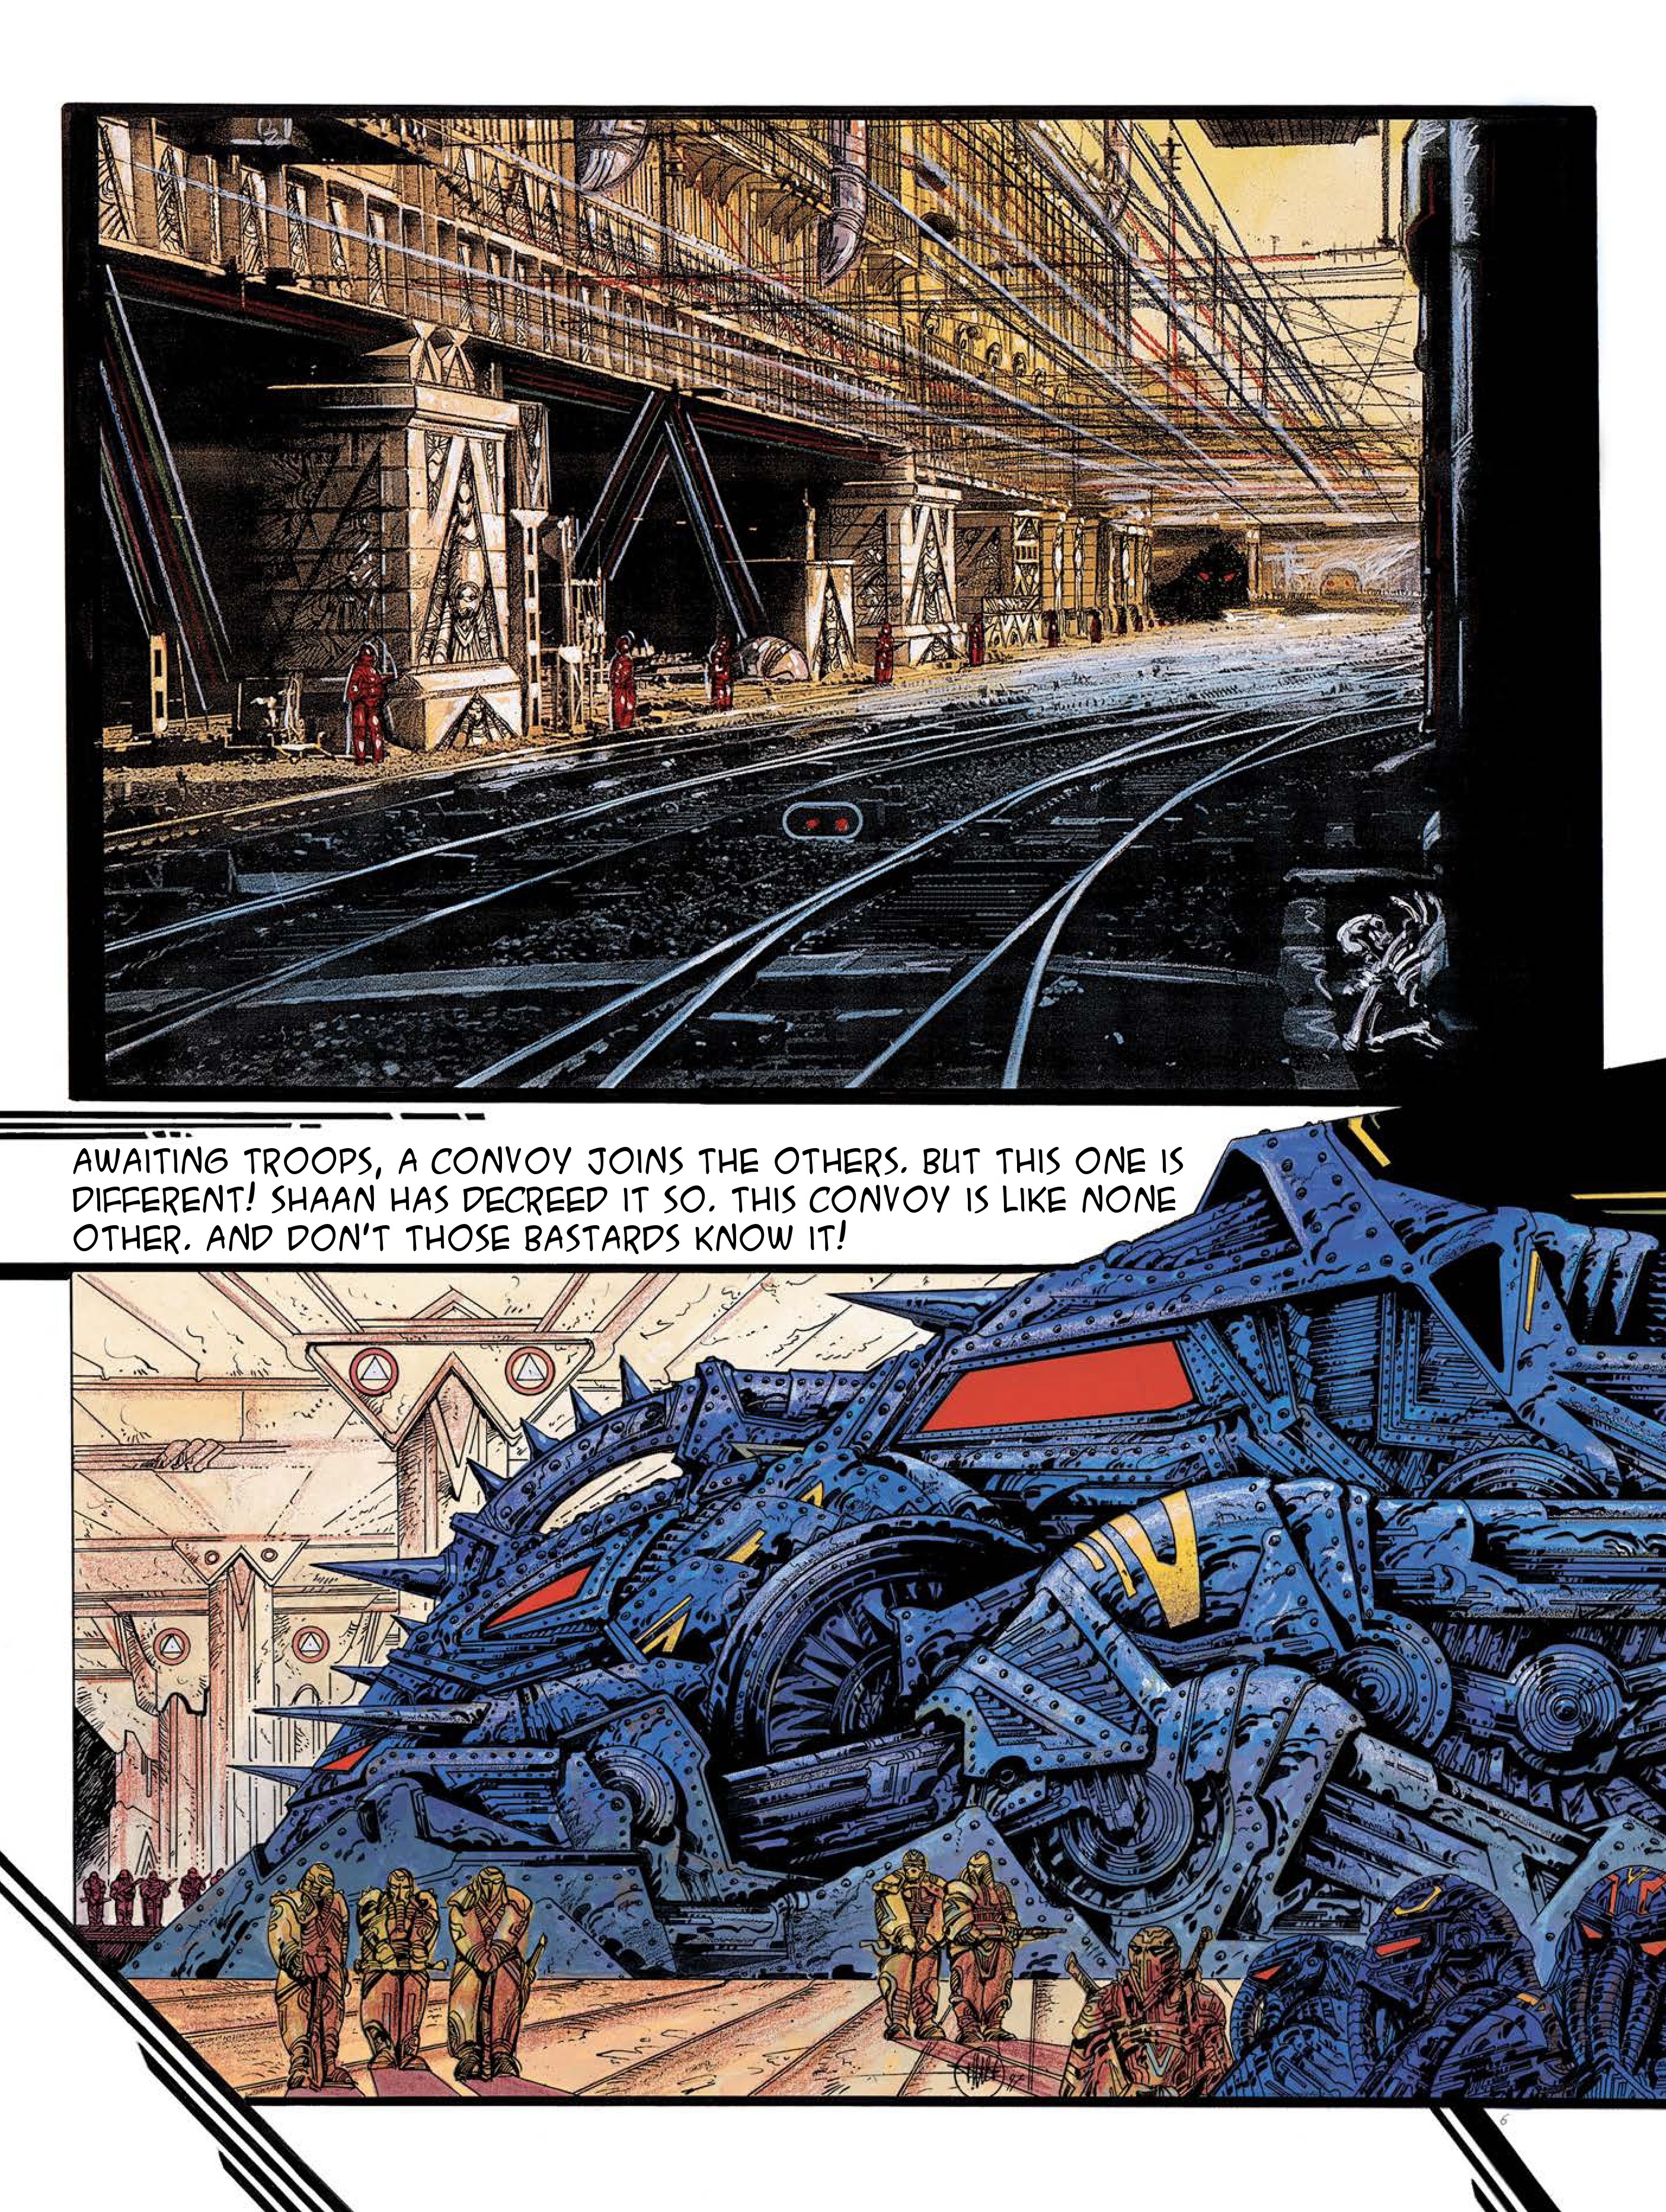 Read online Lone Sloane: Chaos comic -  Issue # Full - 11